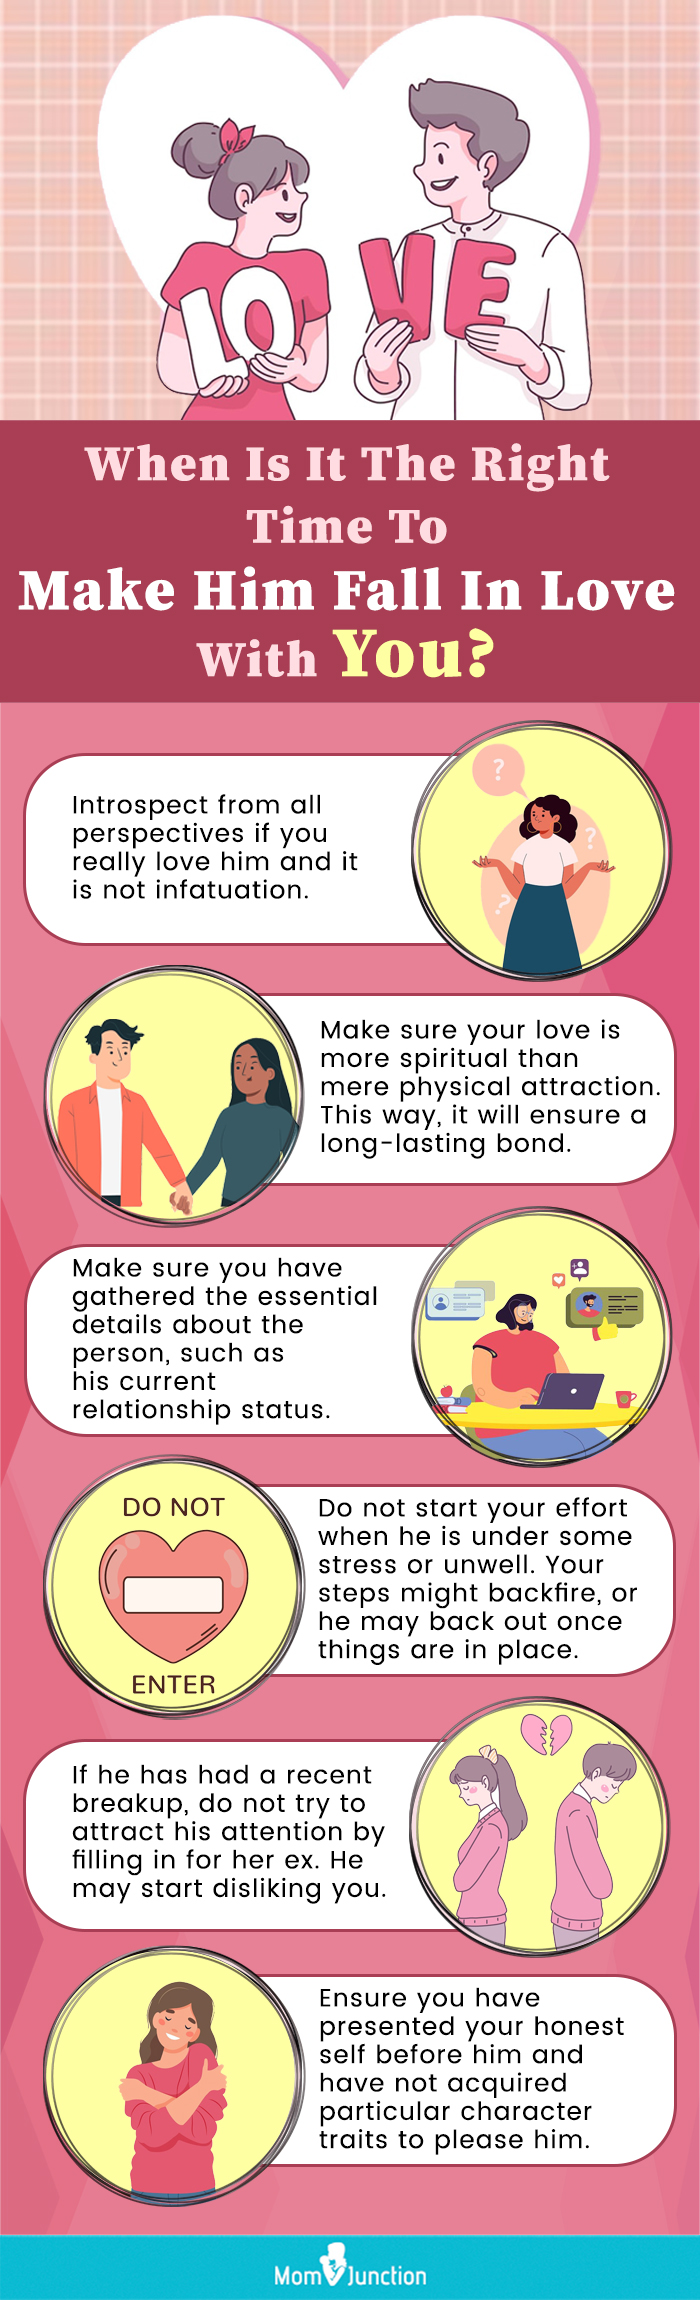 right time to make him fall in love with you (infographic)